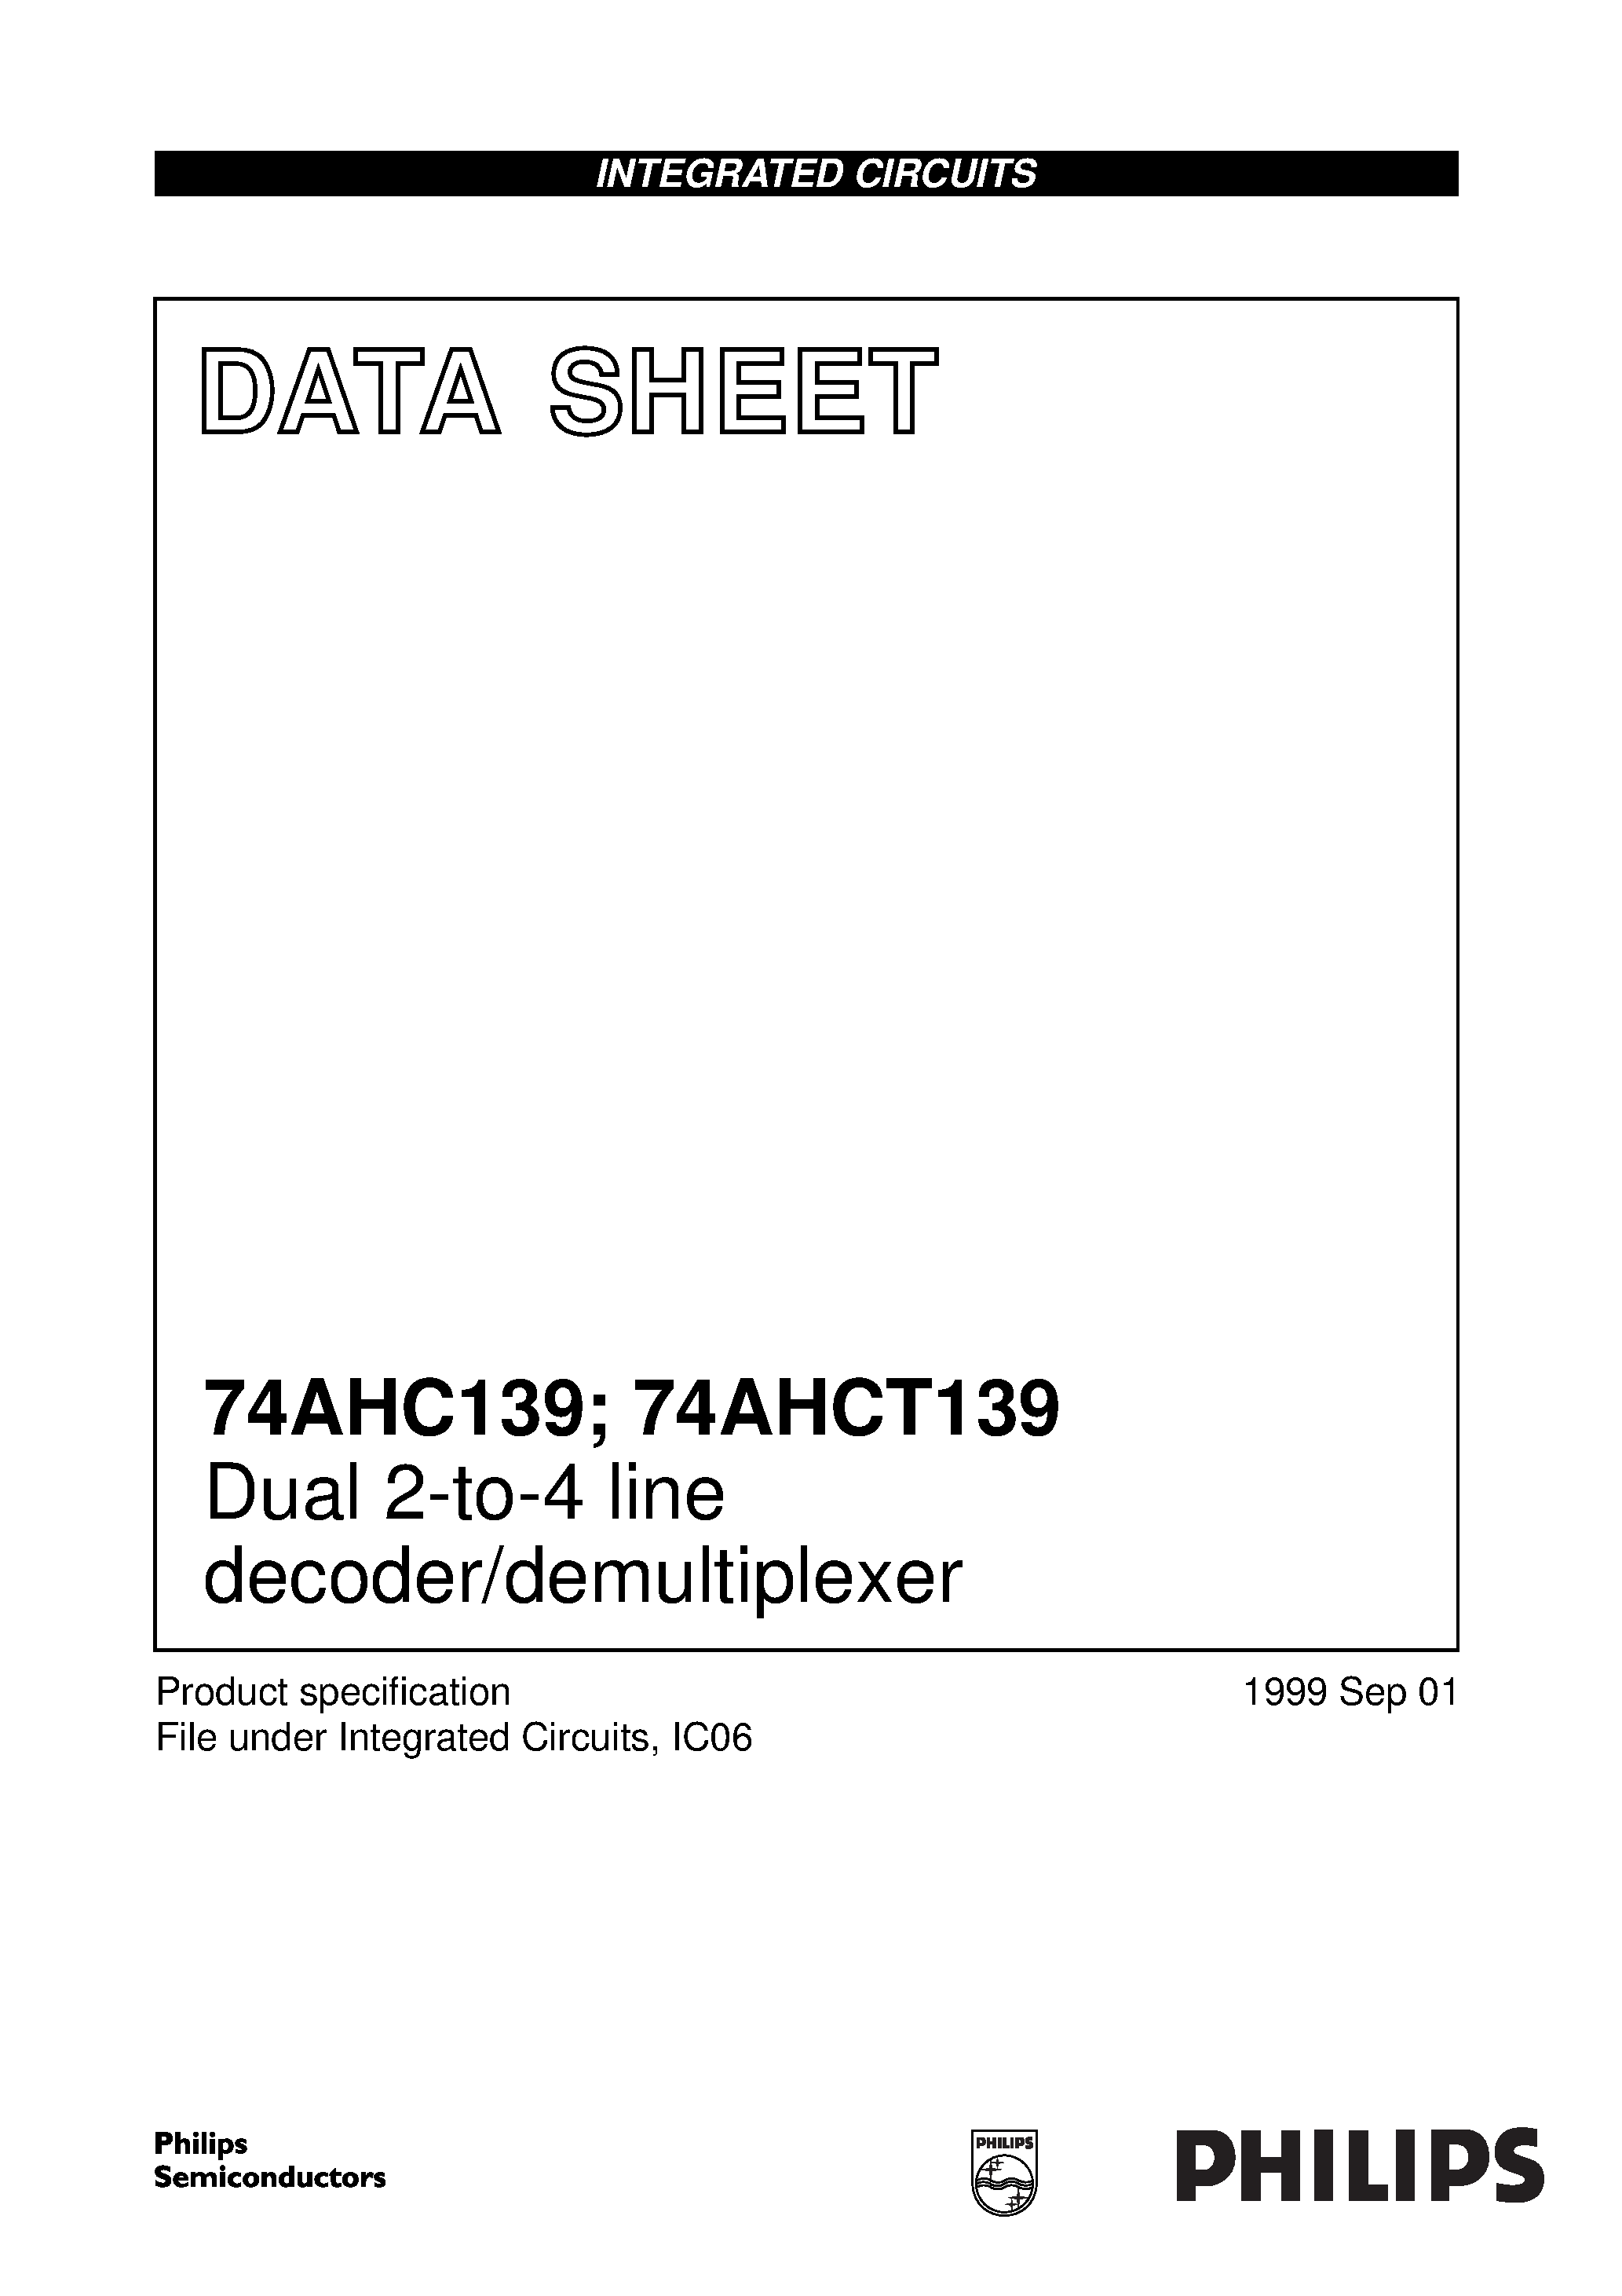 Datasheet 74AHC139PW - Dual 2-to-4 line decoder/demultiplexer page 1